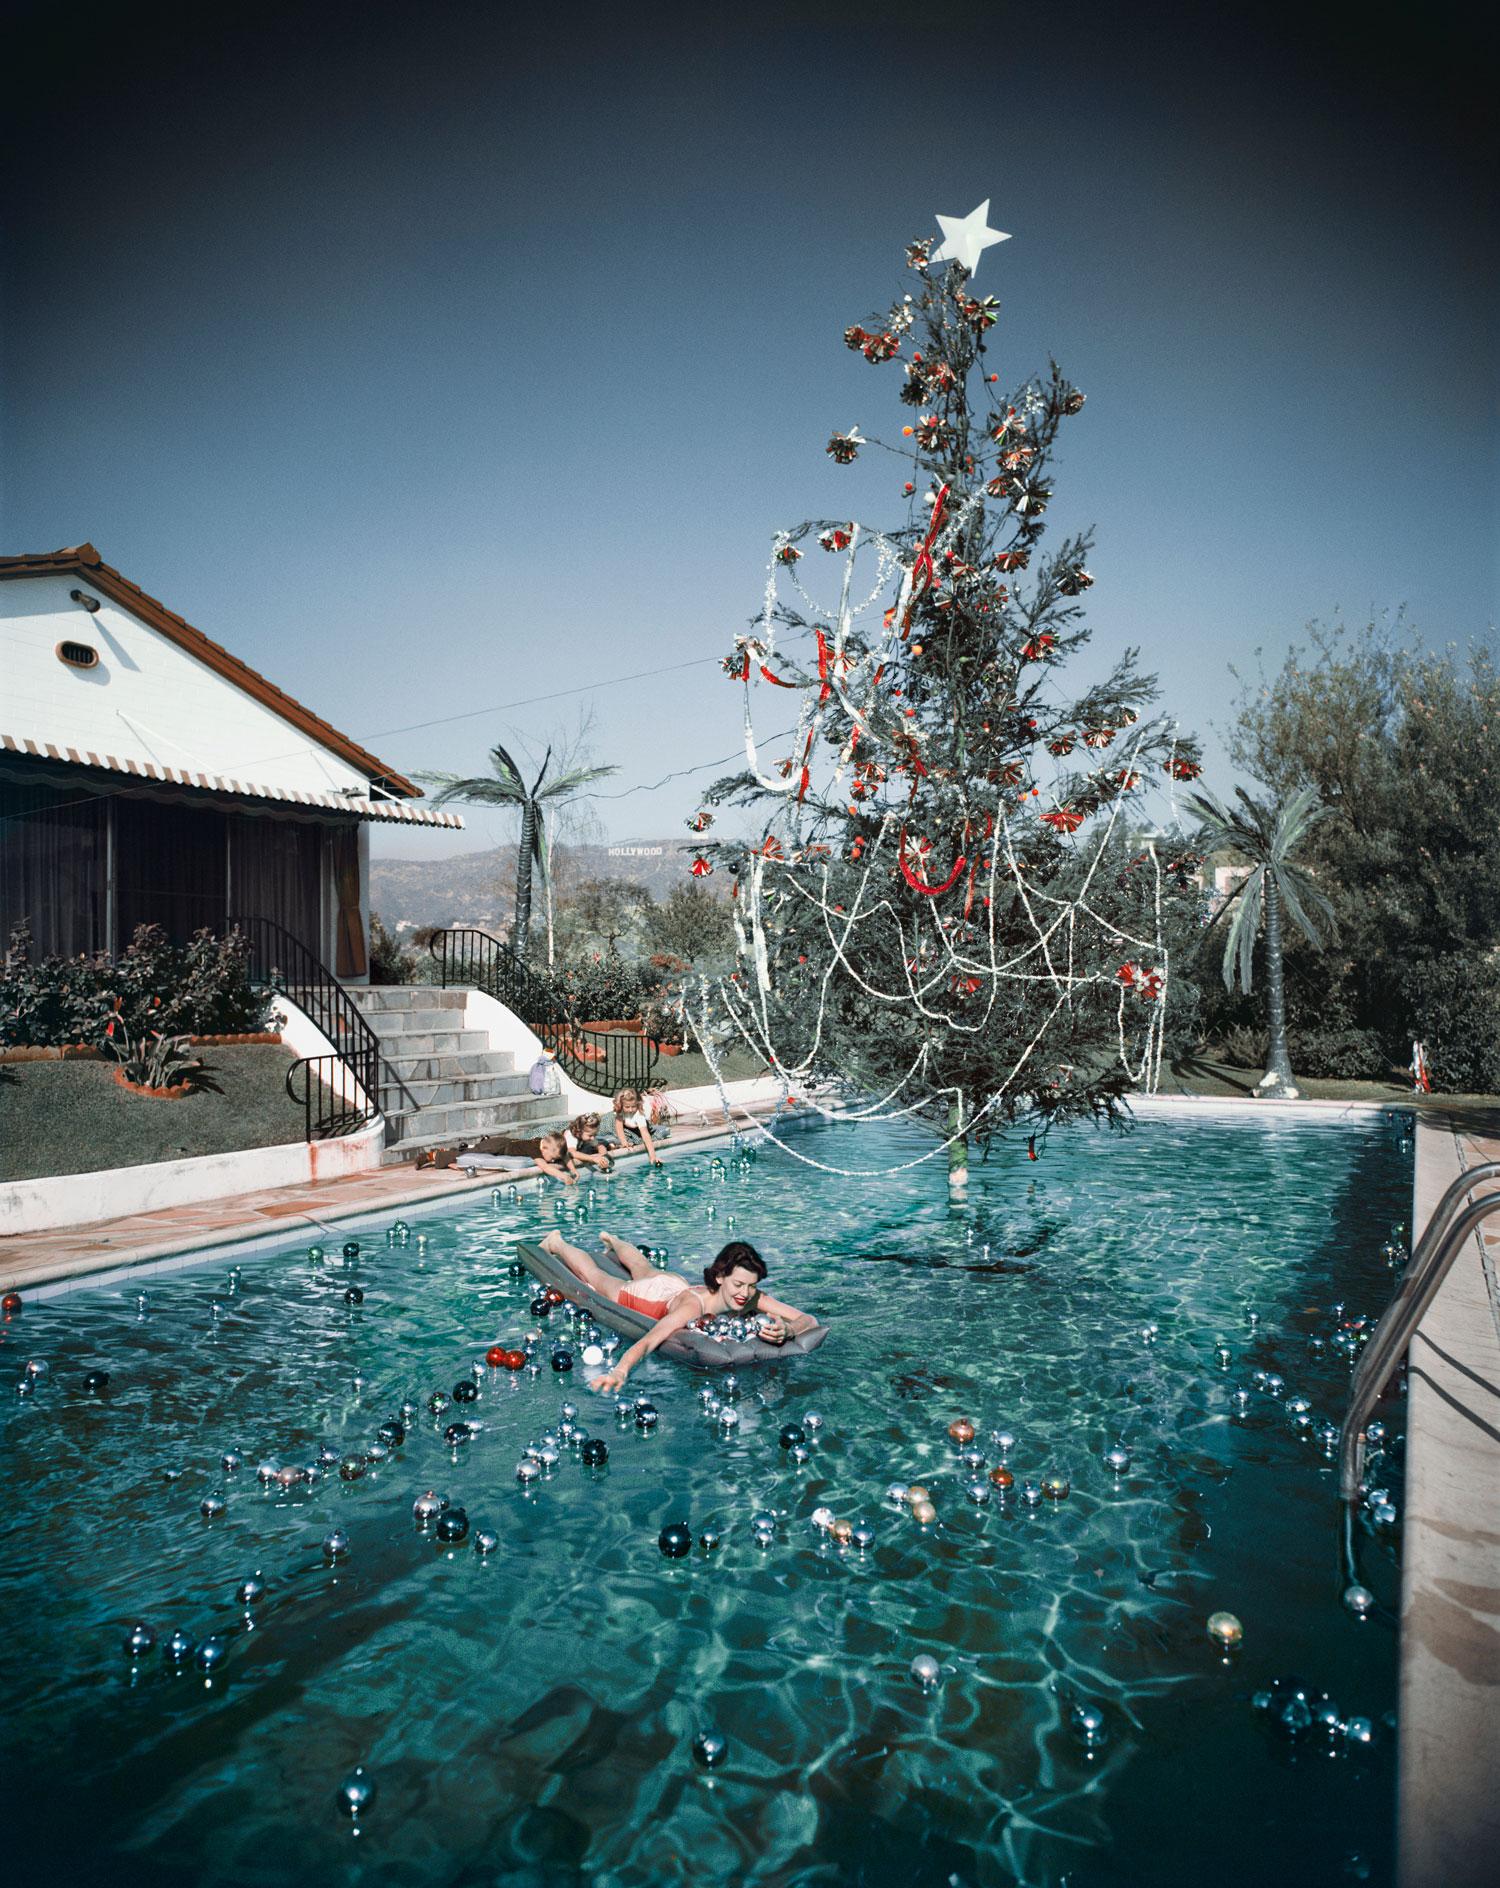 Slim Aarons
Christmas Swim
1954 (printed later)
C print 
Estate stamped and numbered edition of 150 
with Certificate of authenticity

Rita Aarons, wife of photographer Slim Aarons, swimming in a pool festooned with floating baubles and a decorated